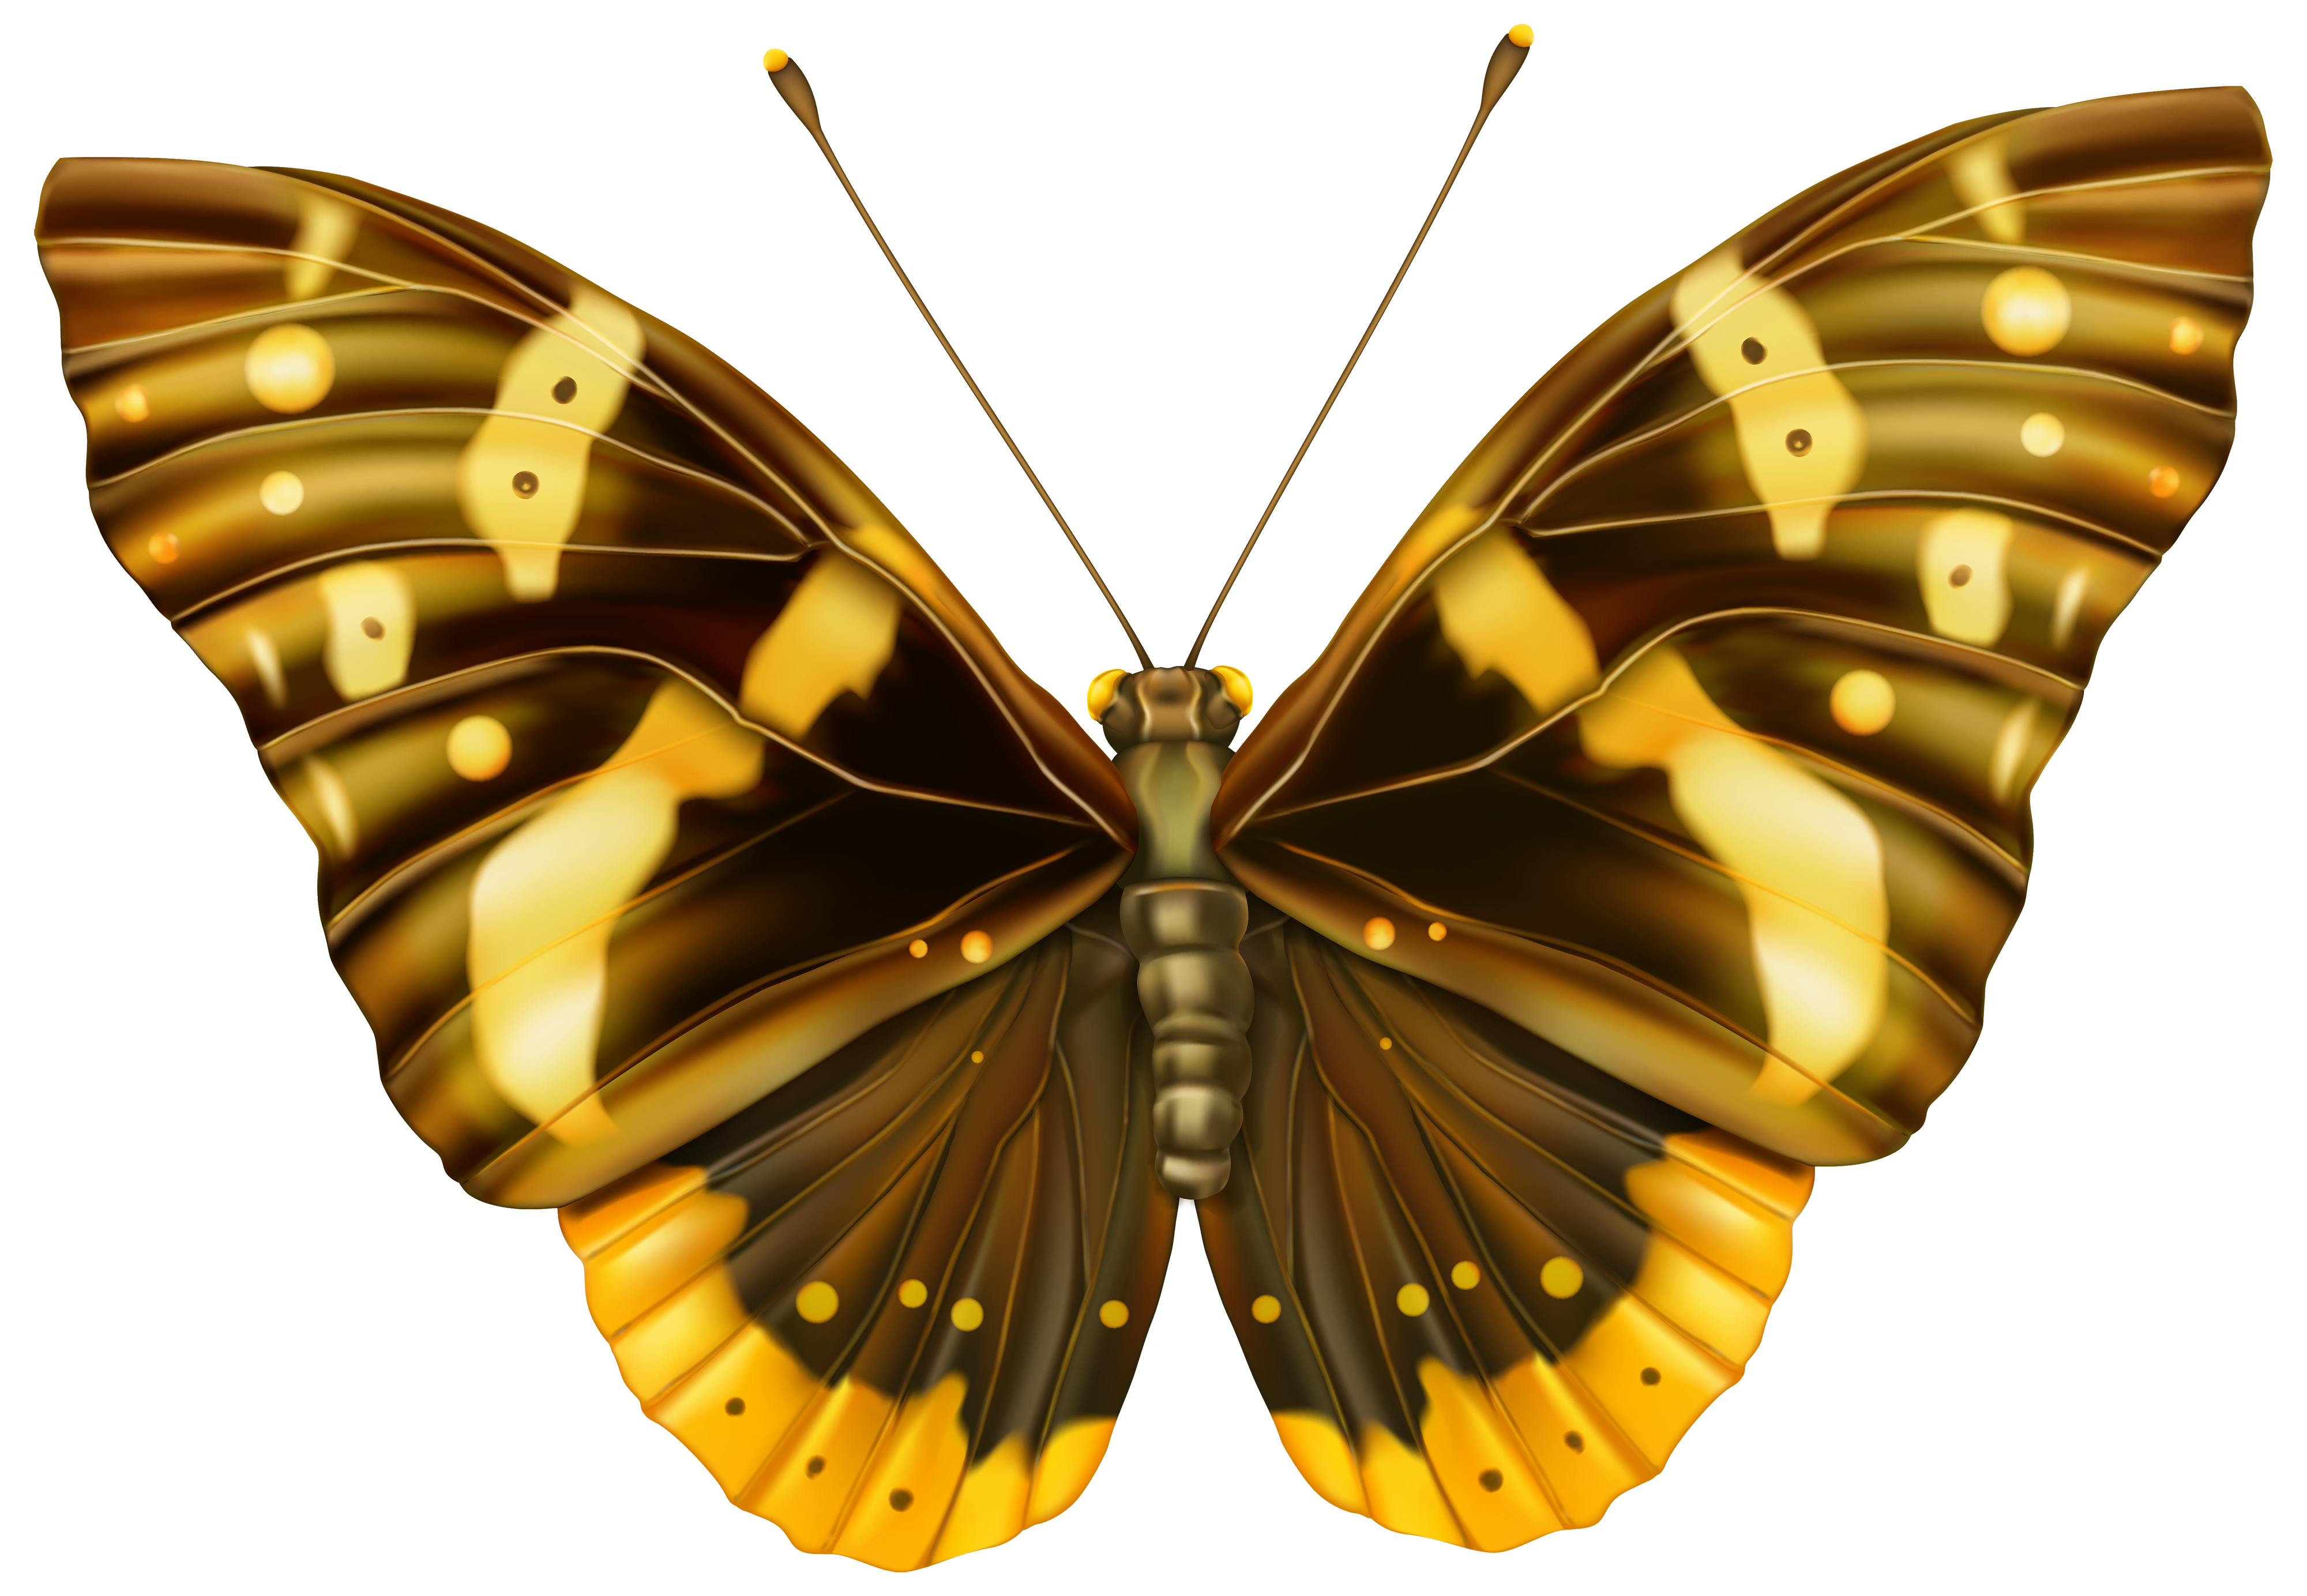 8 Yellow, Brown and Tan Butterfly Pictures! - The Graphics Fairy